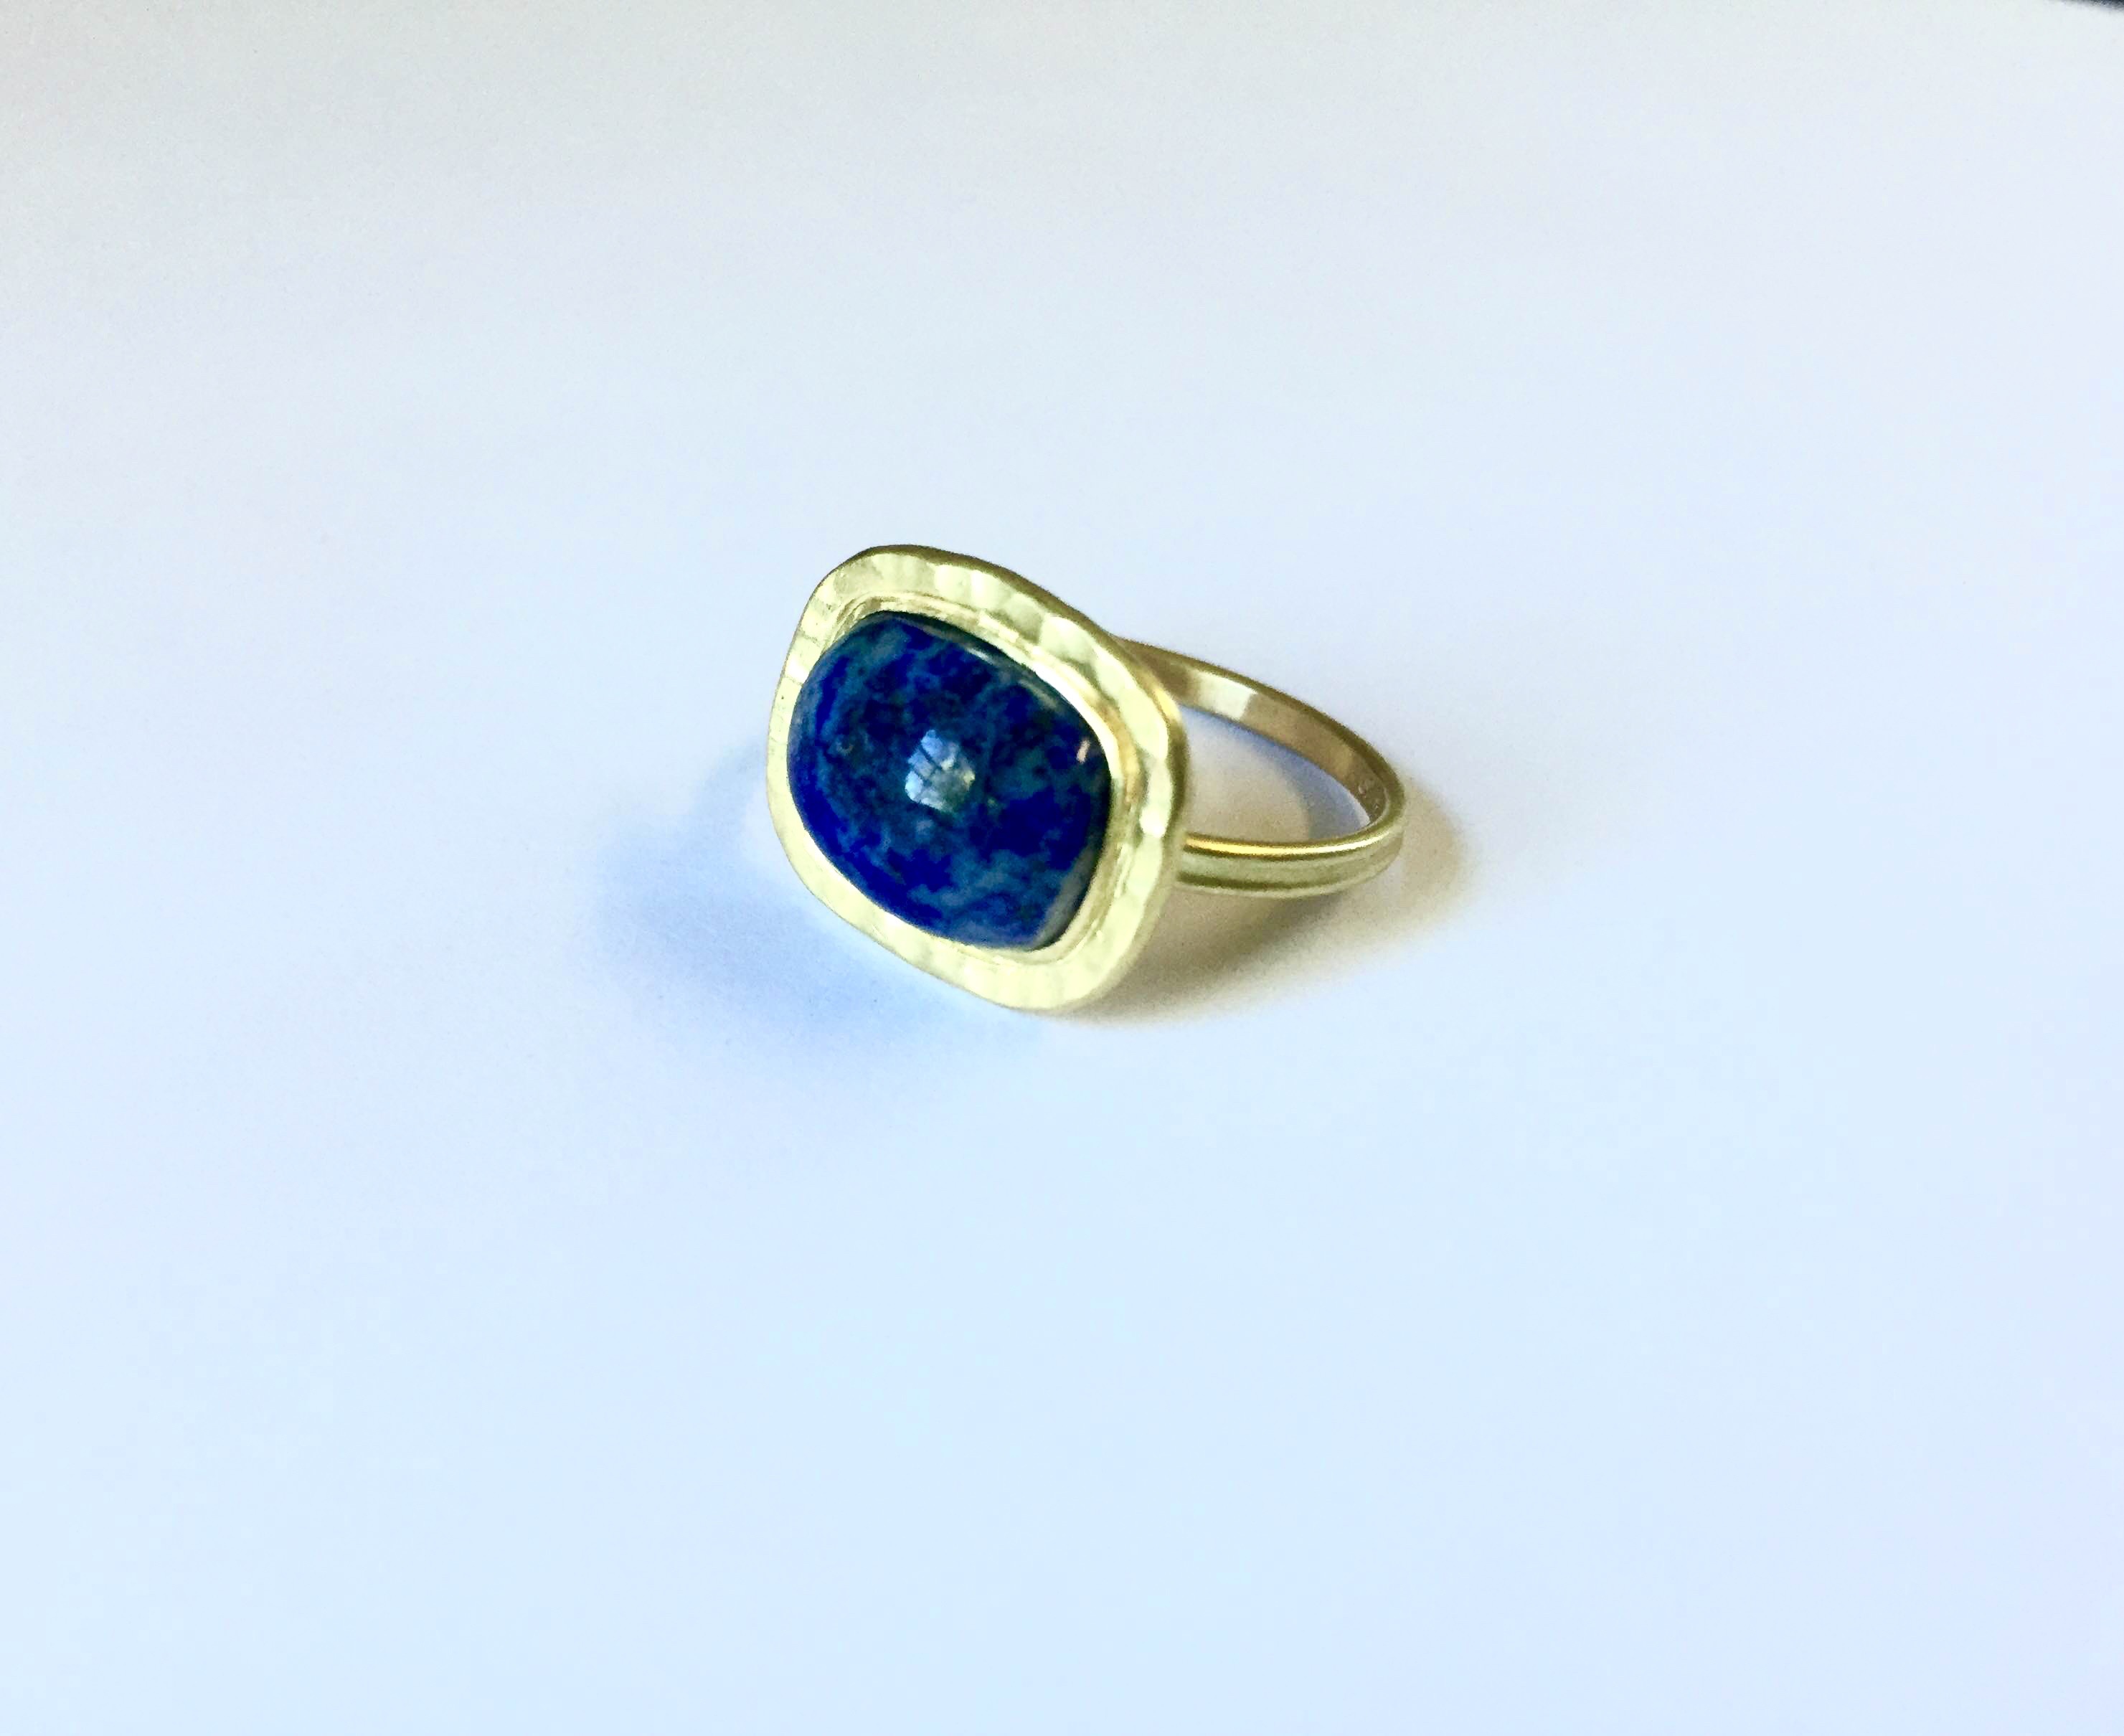 Ancient-Style Gold Ring with Re-cut Lapis